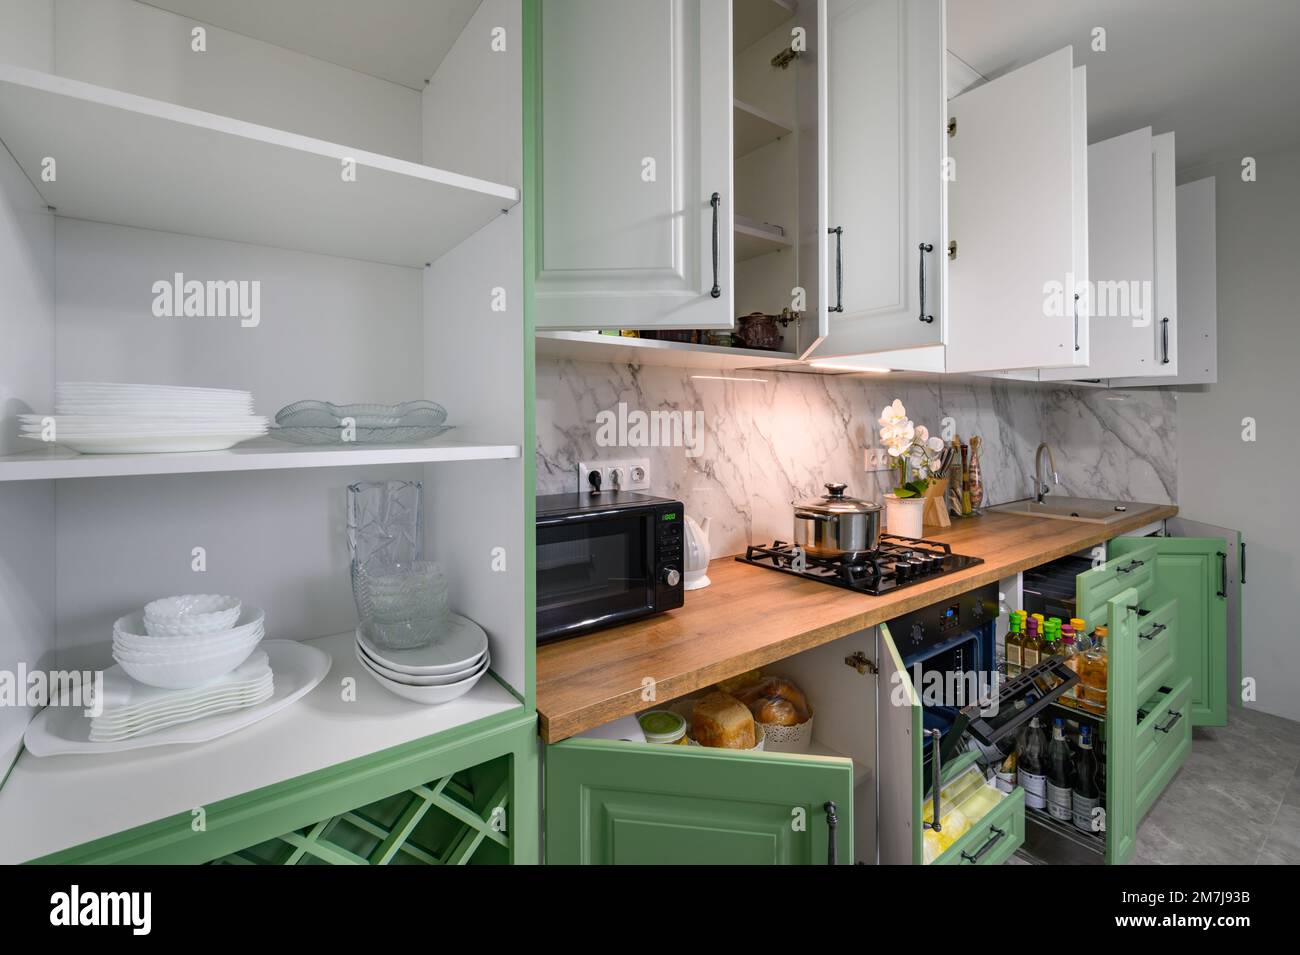 File:White kitchen with cabinet doors and drawers opened or